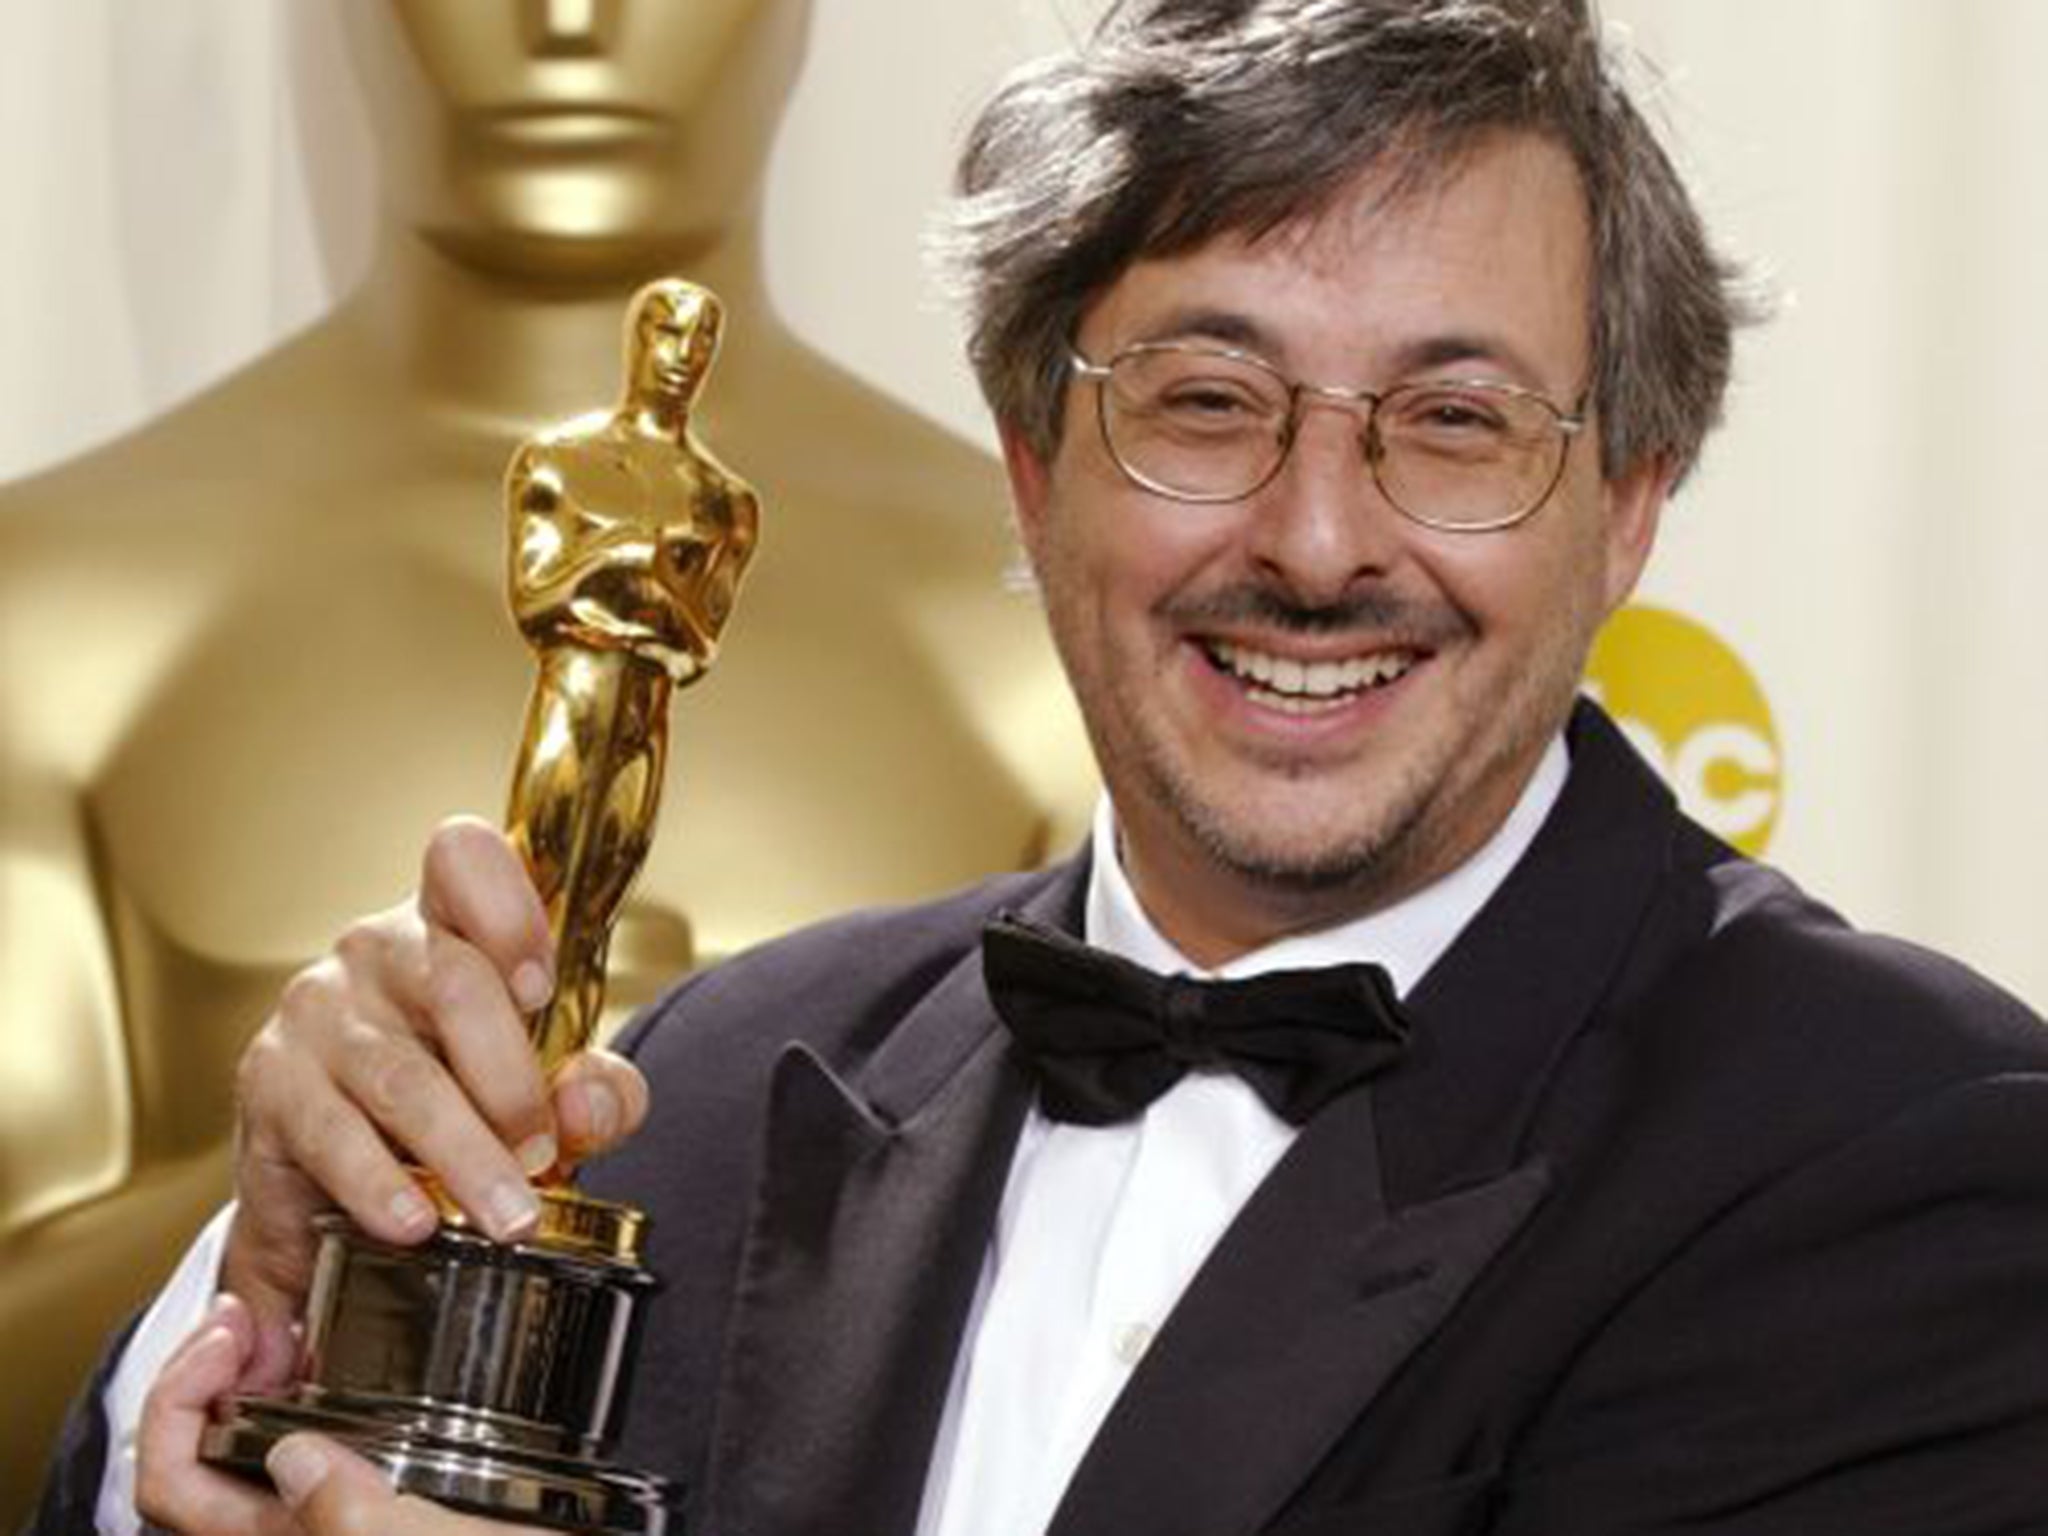 Lesnie with his Oscar in 2002: Peter Jackson spoke of his ‘infectious laugh’ and ‘quiet wisdom’